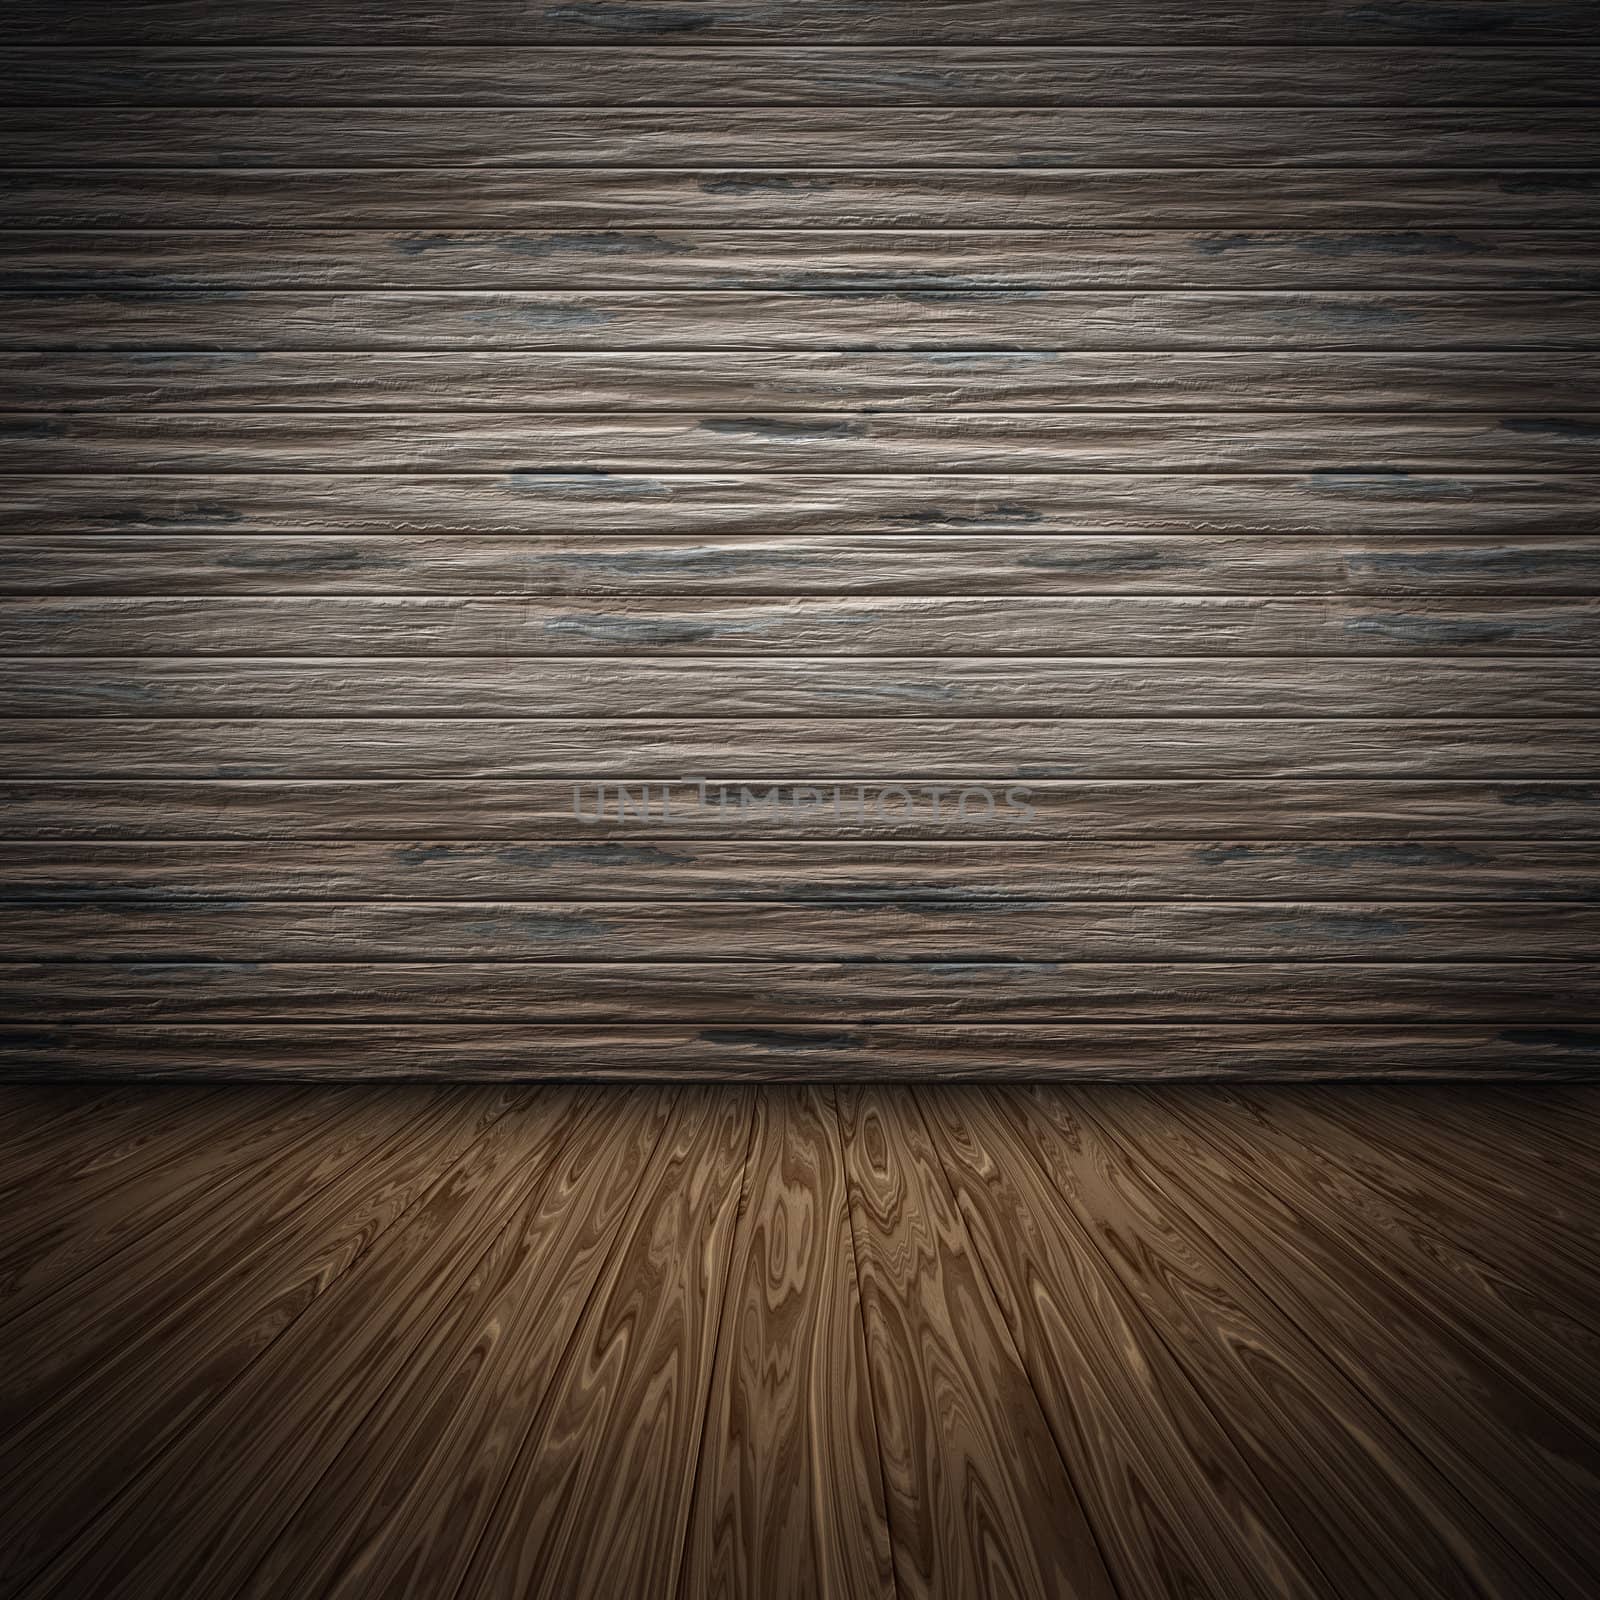 An image of a nice wooden floor background